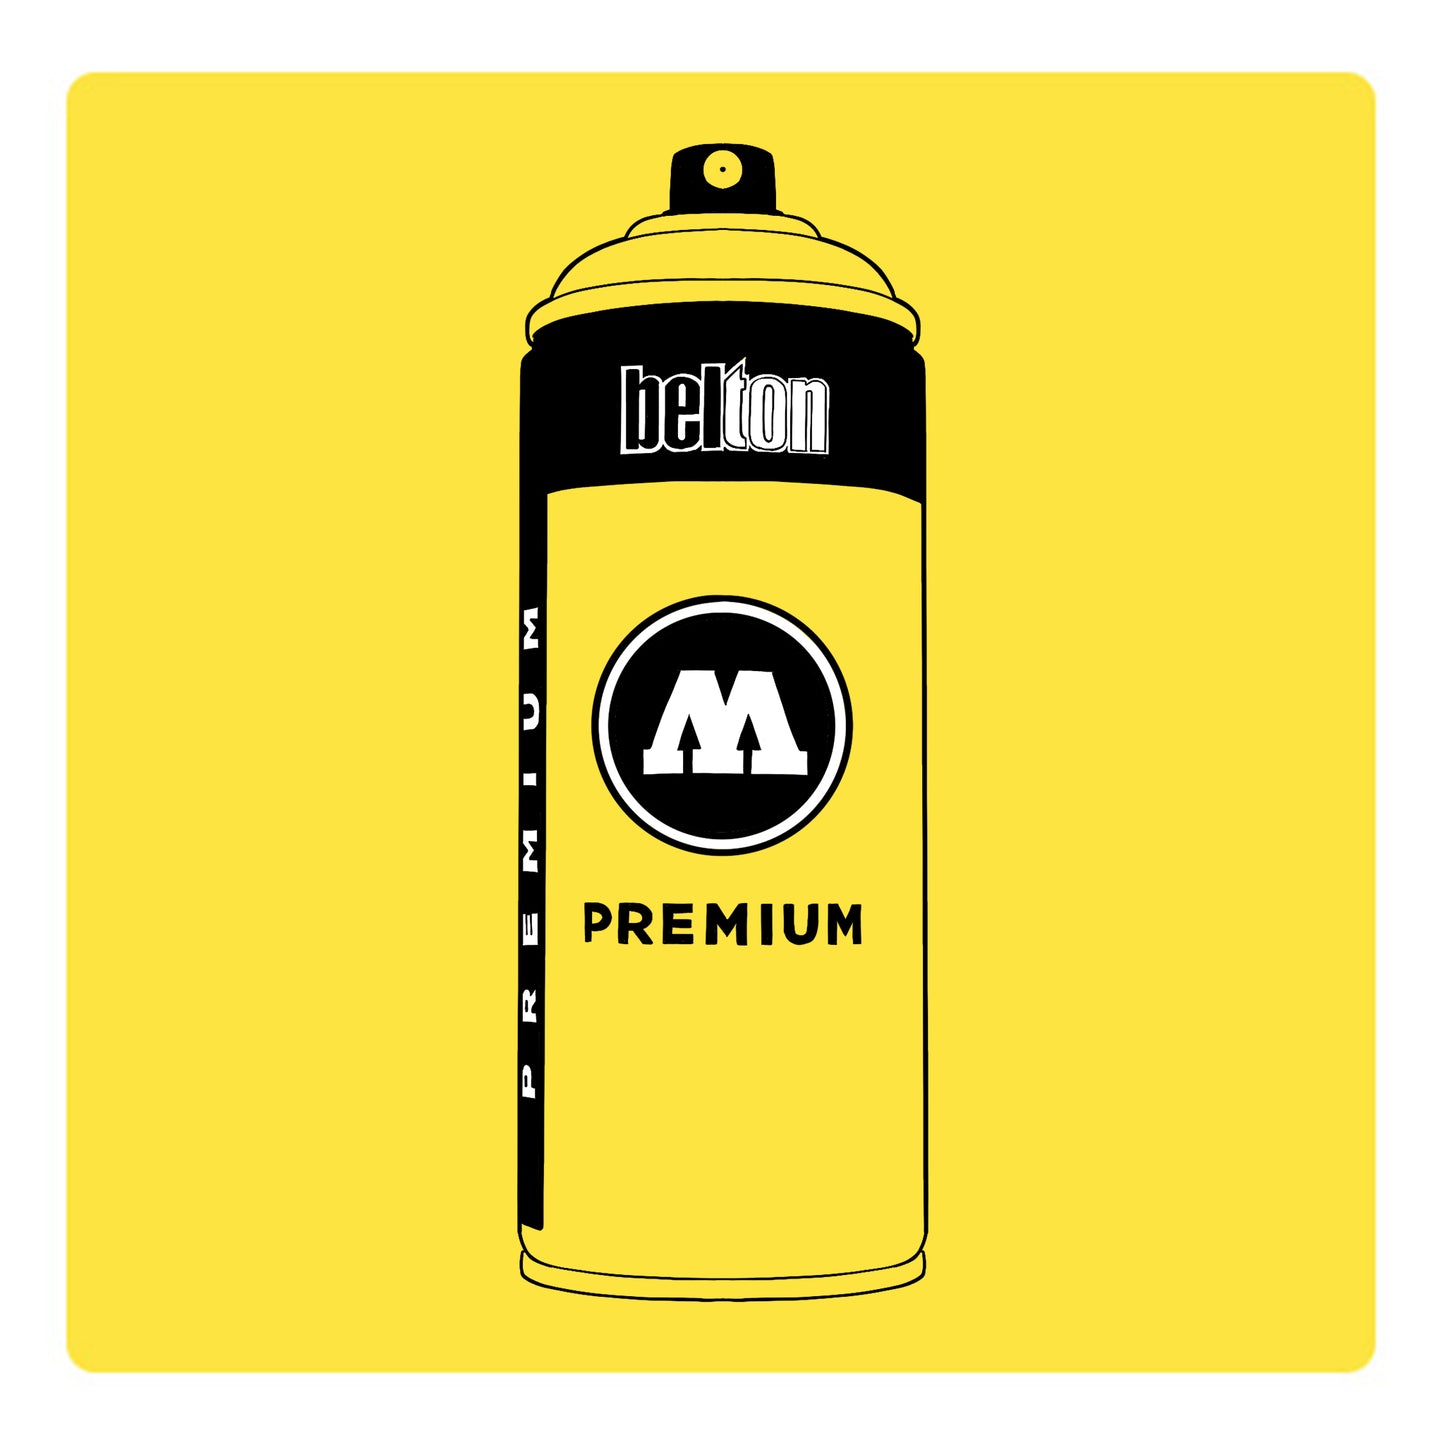 A black outline drawing of a lemon yellow spray paint can with the words "belton","premium" and the letter"M" written on the face in black and white font. The background is a color swatch of the same lemon yellow with a white border.